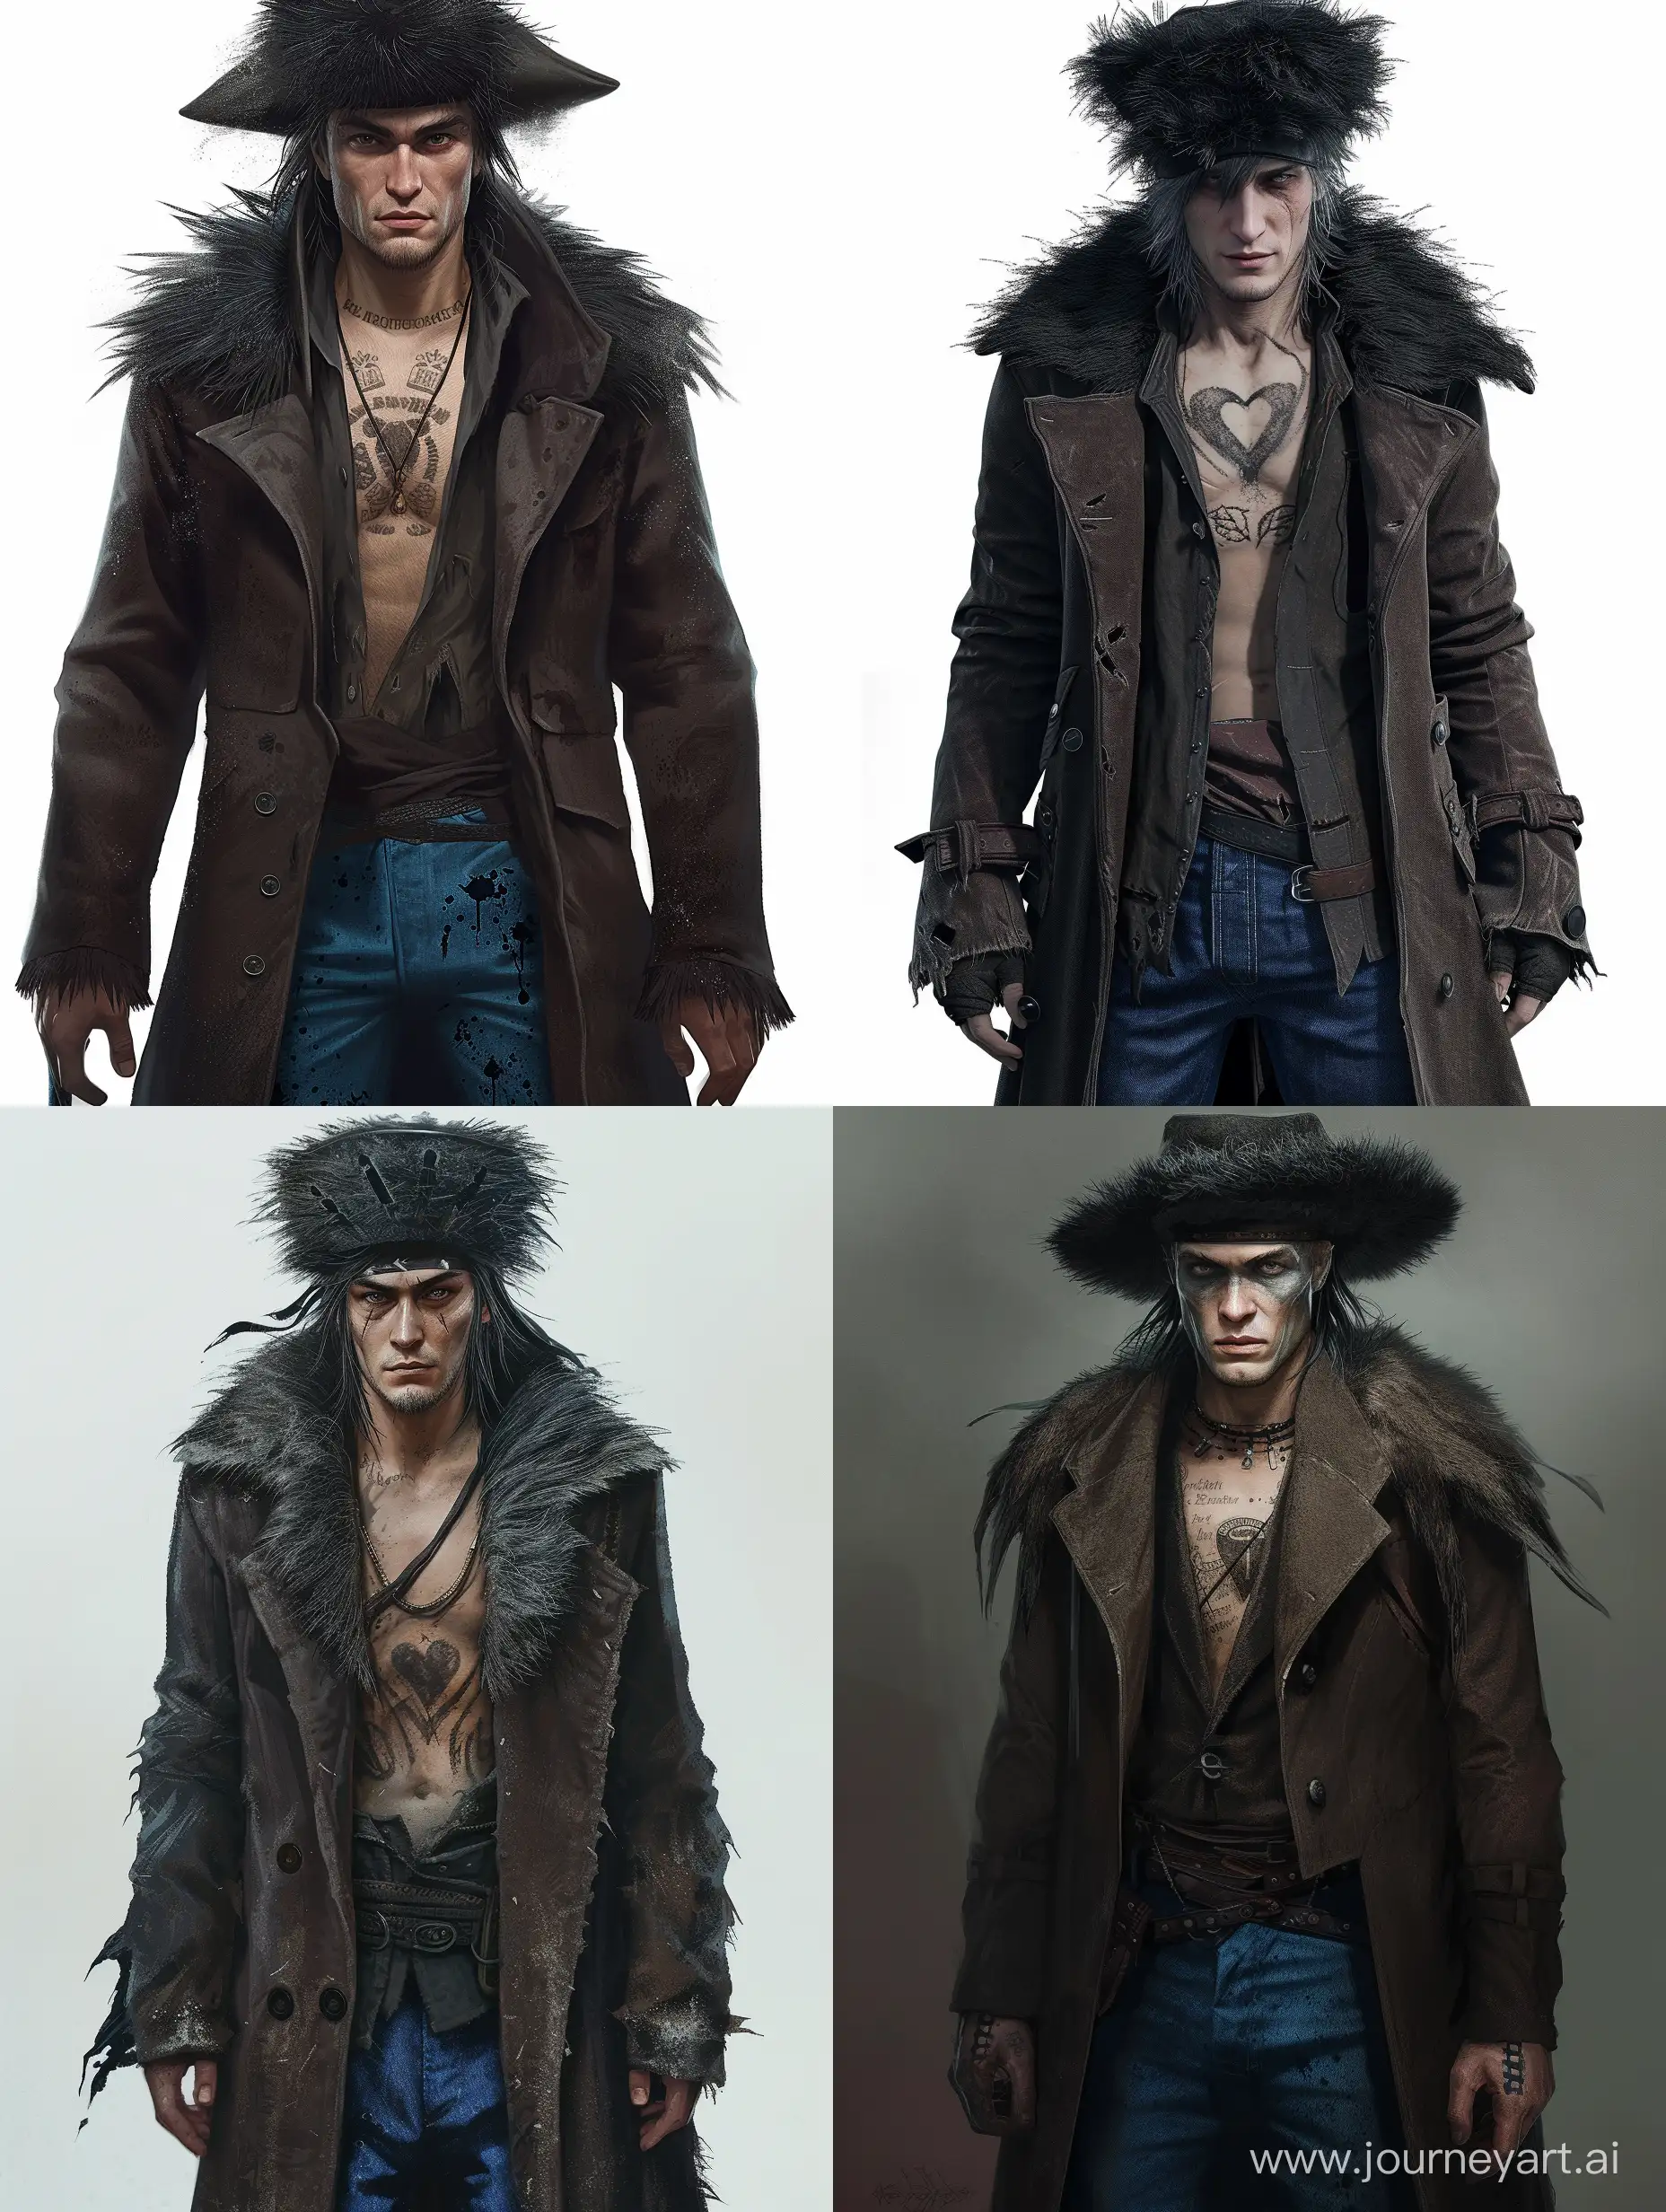 Mysterious-Man-in-NorthernStyle-Fur-Hat-and-Heart-Tattooed-Chest